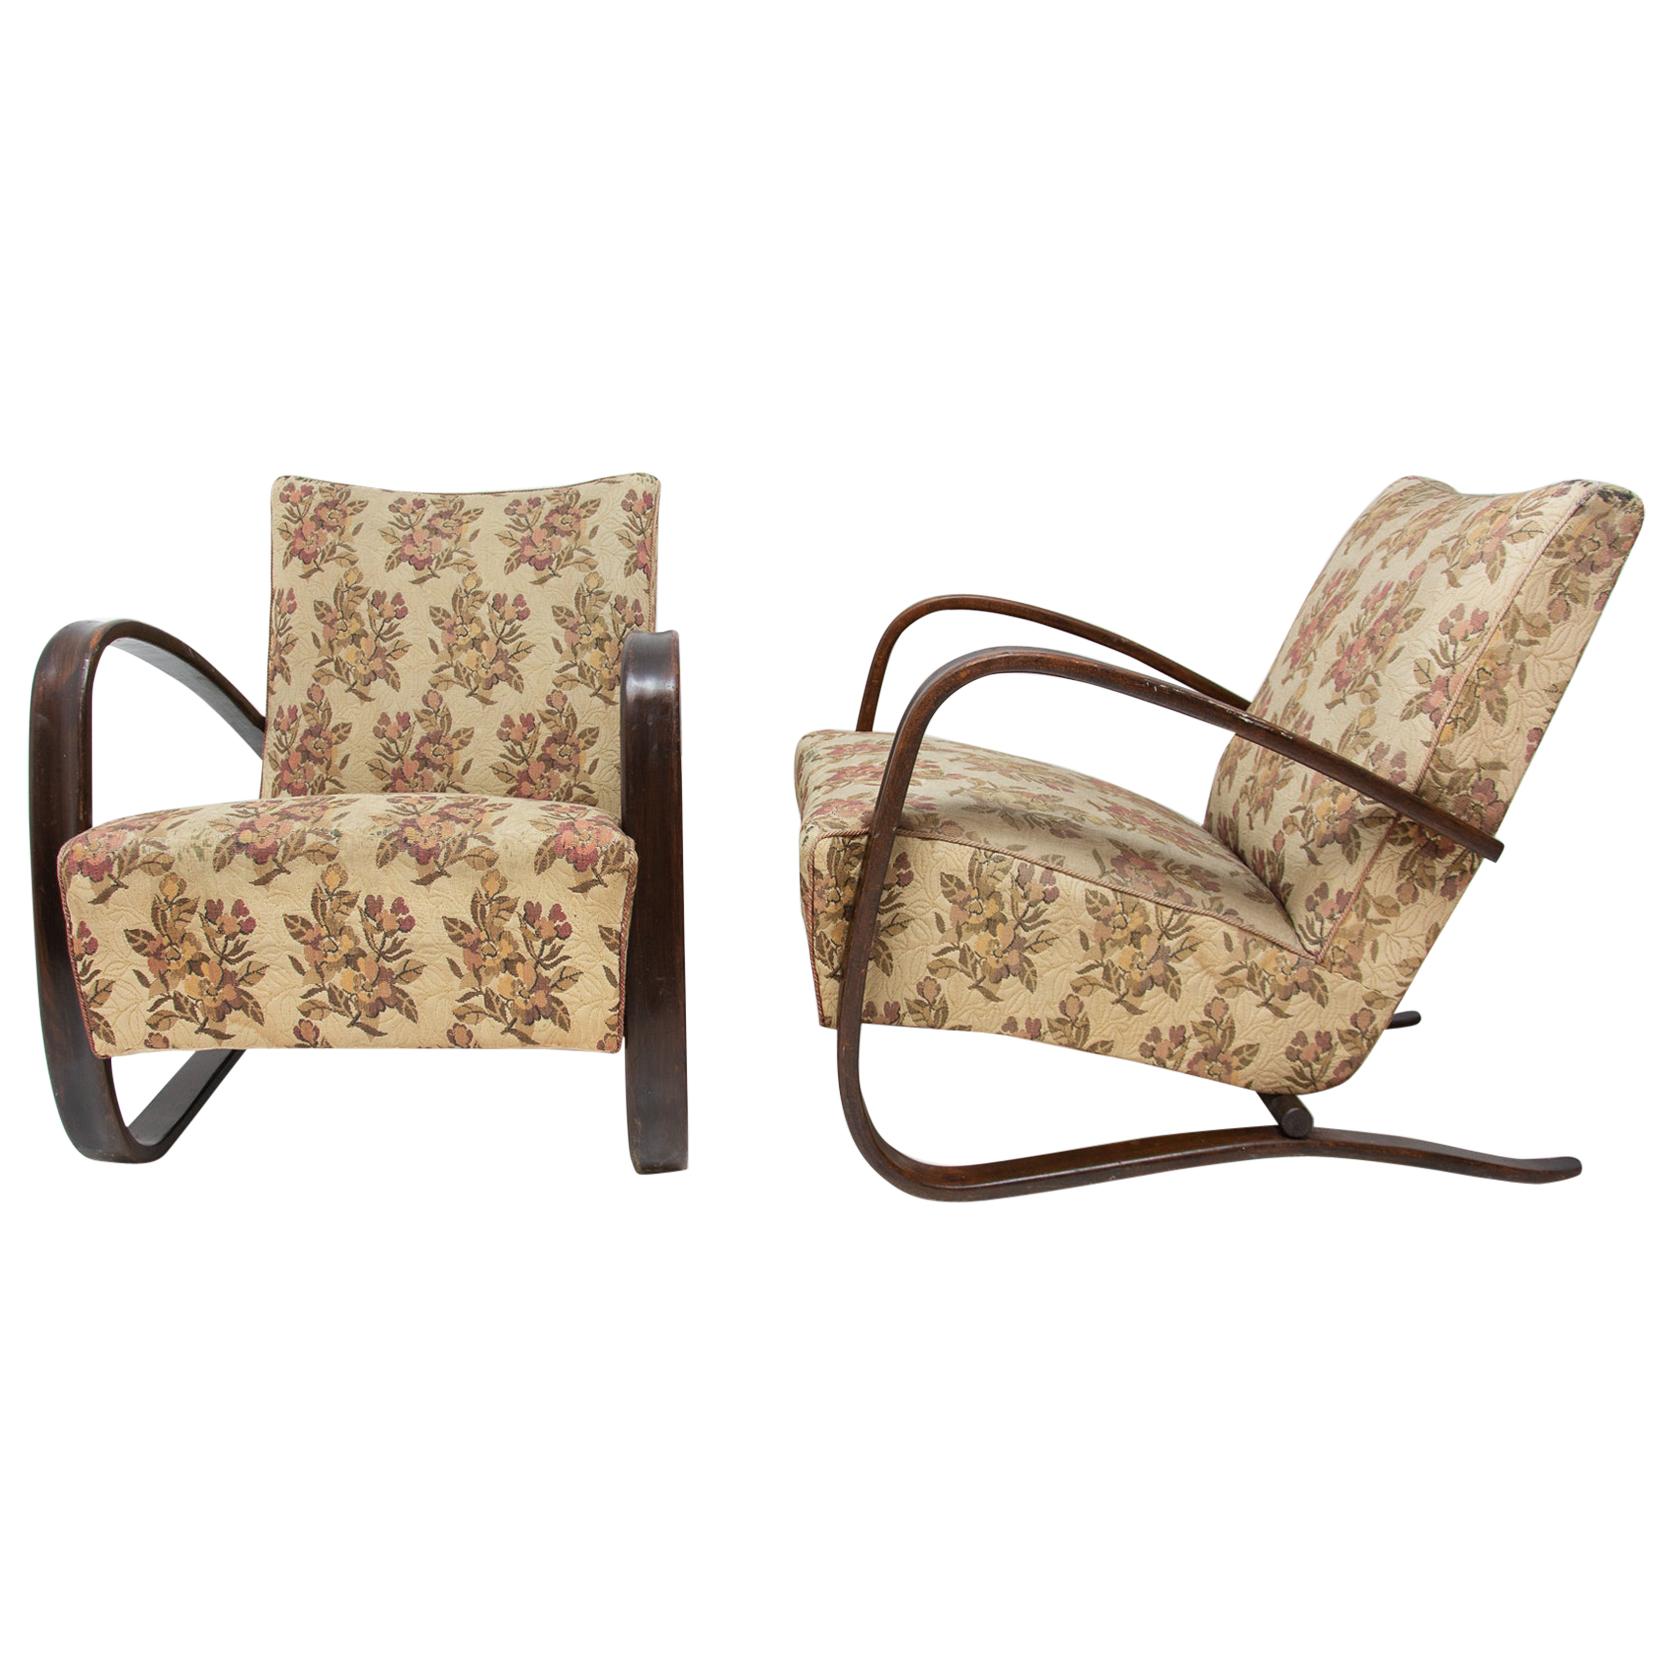 Pair of H-269 Armchairs Designed by Jindrich Halabala, 1930s